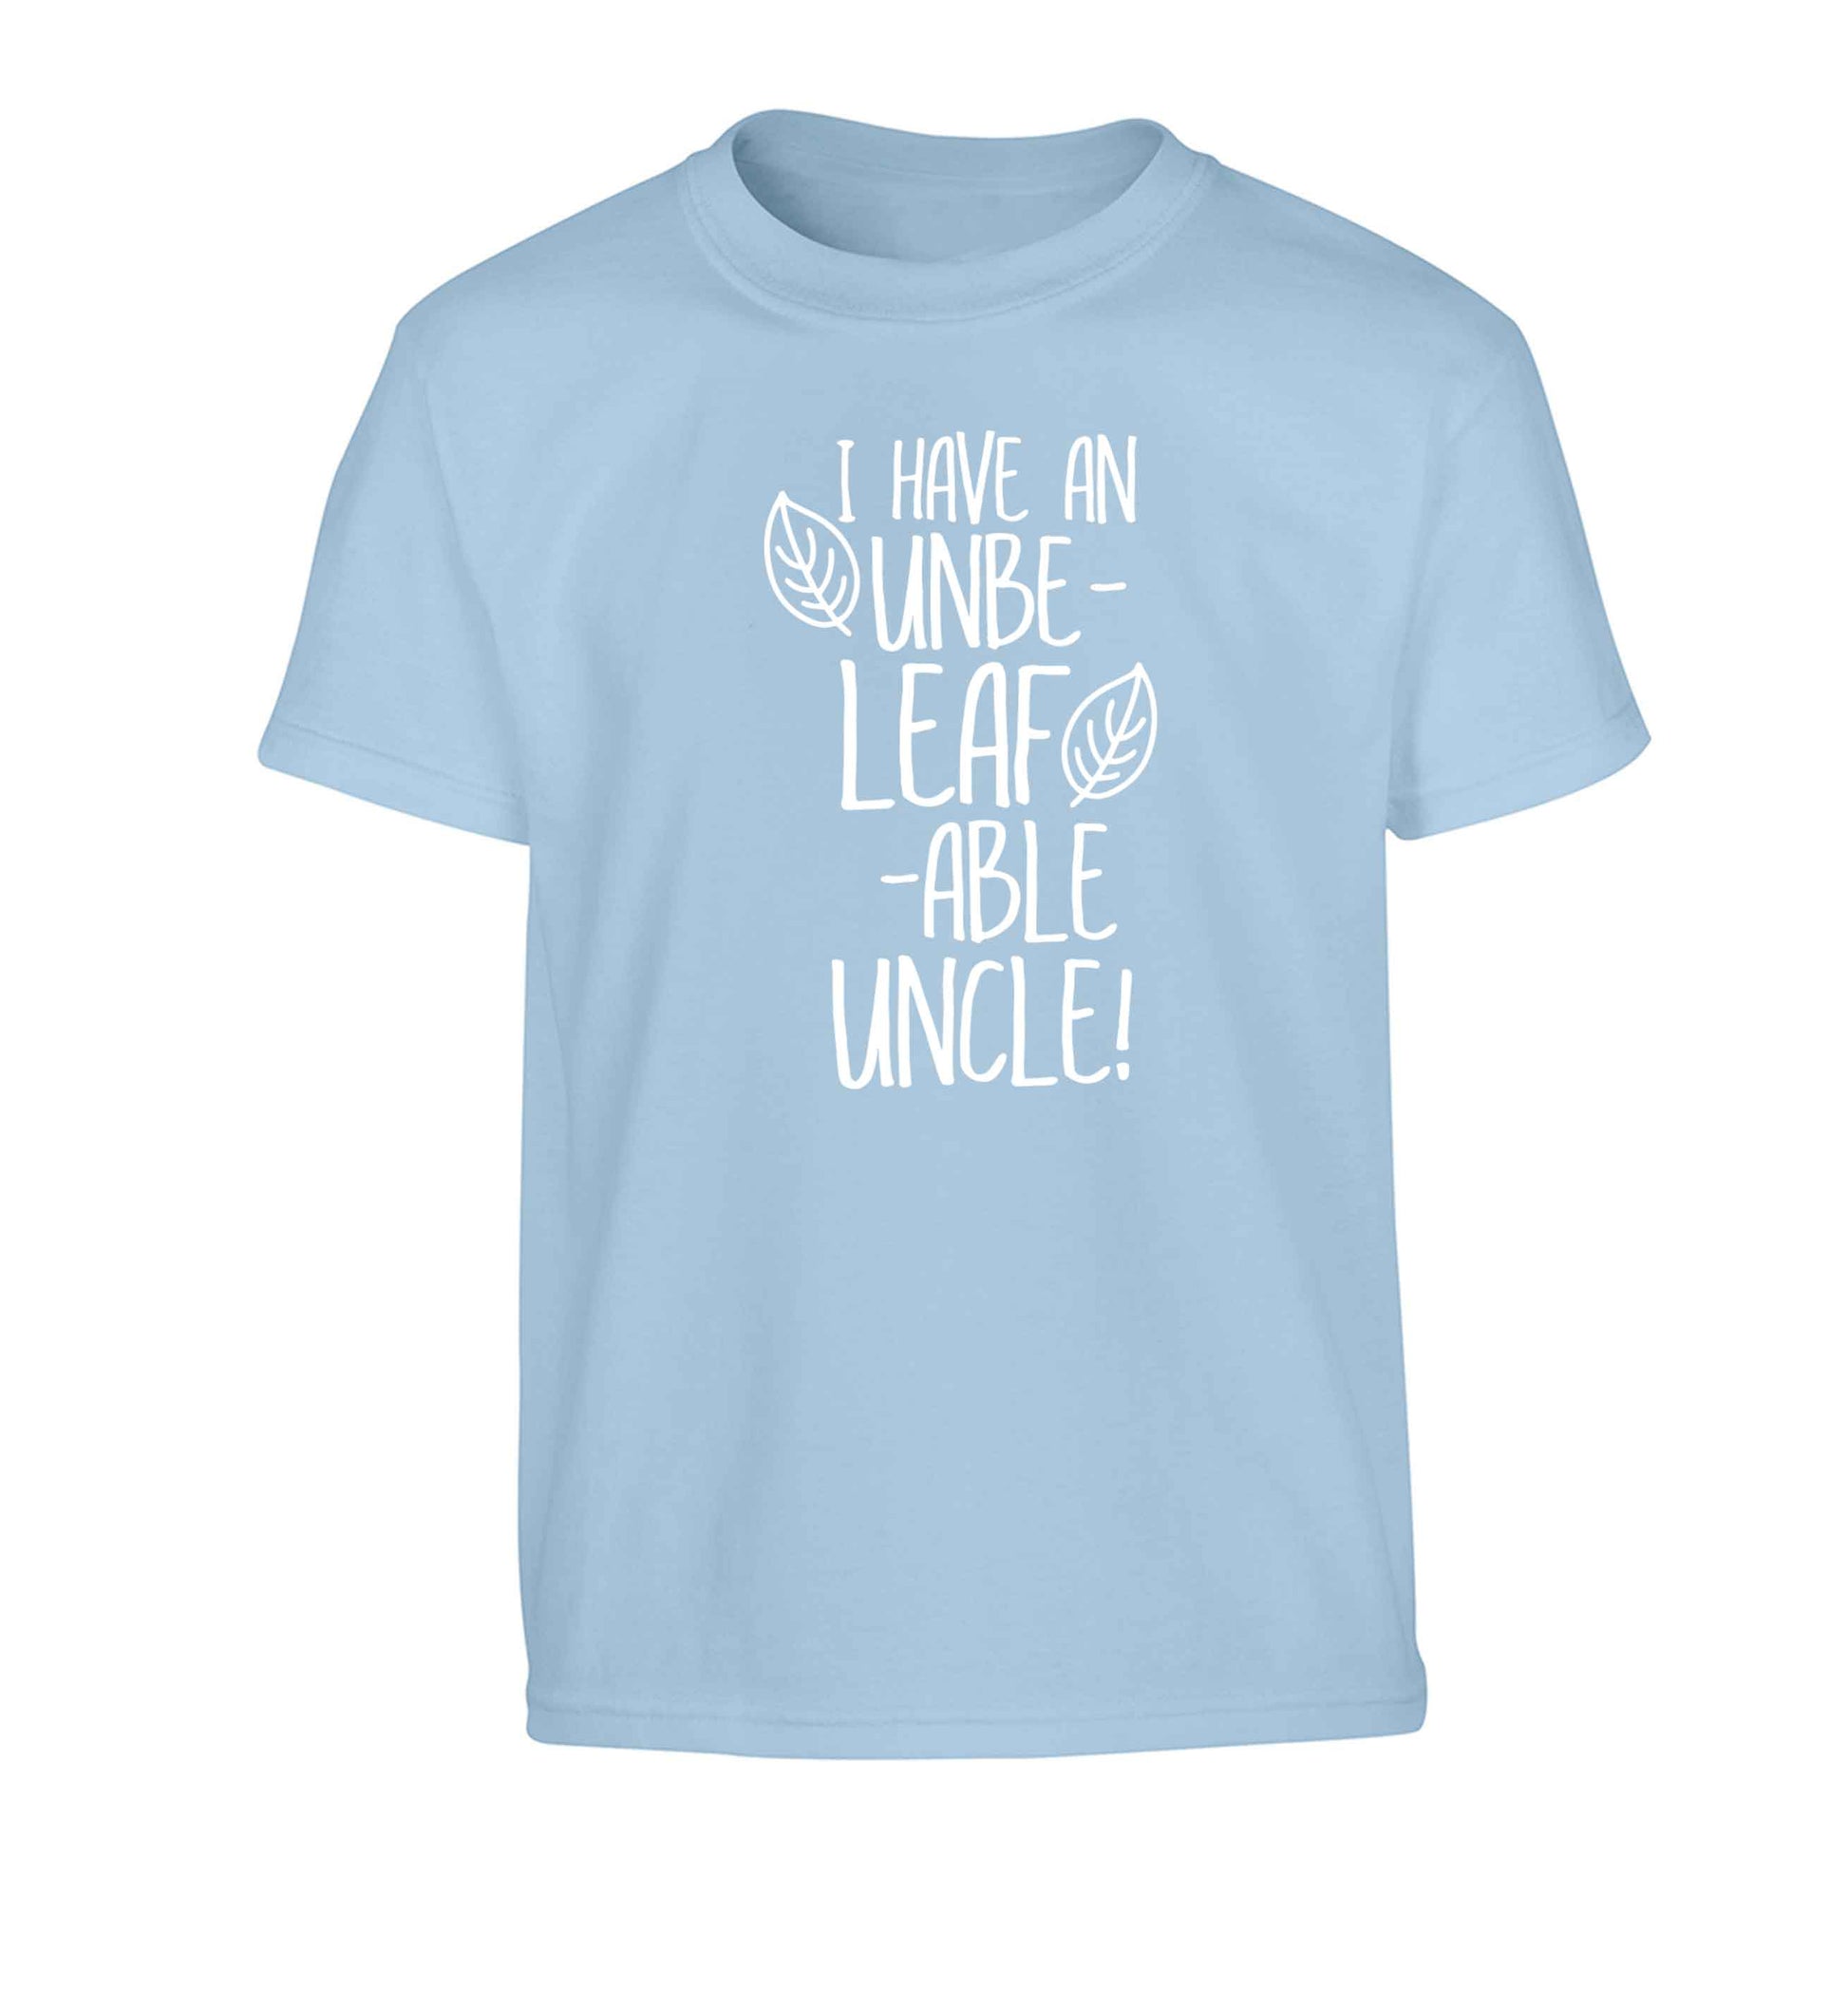 I have an unbe-leaf-able uncle Children's light blue Tshirt 12-13 Years